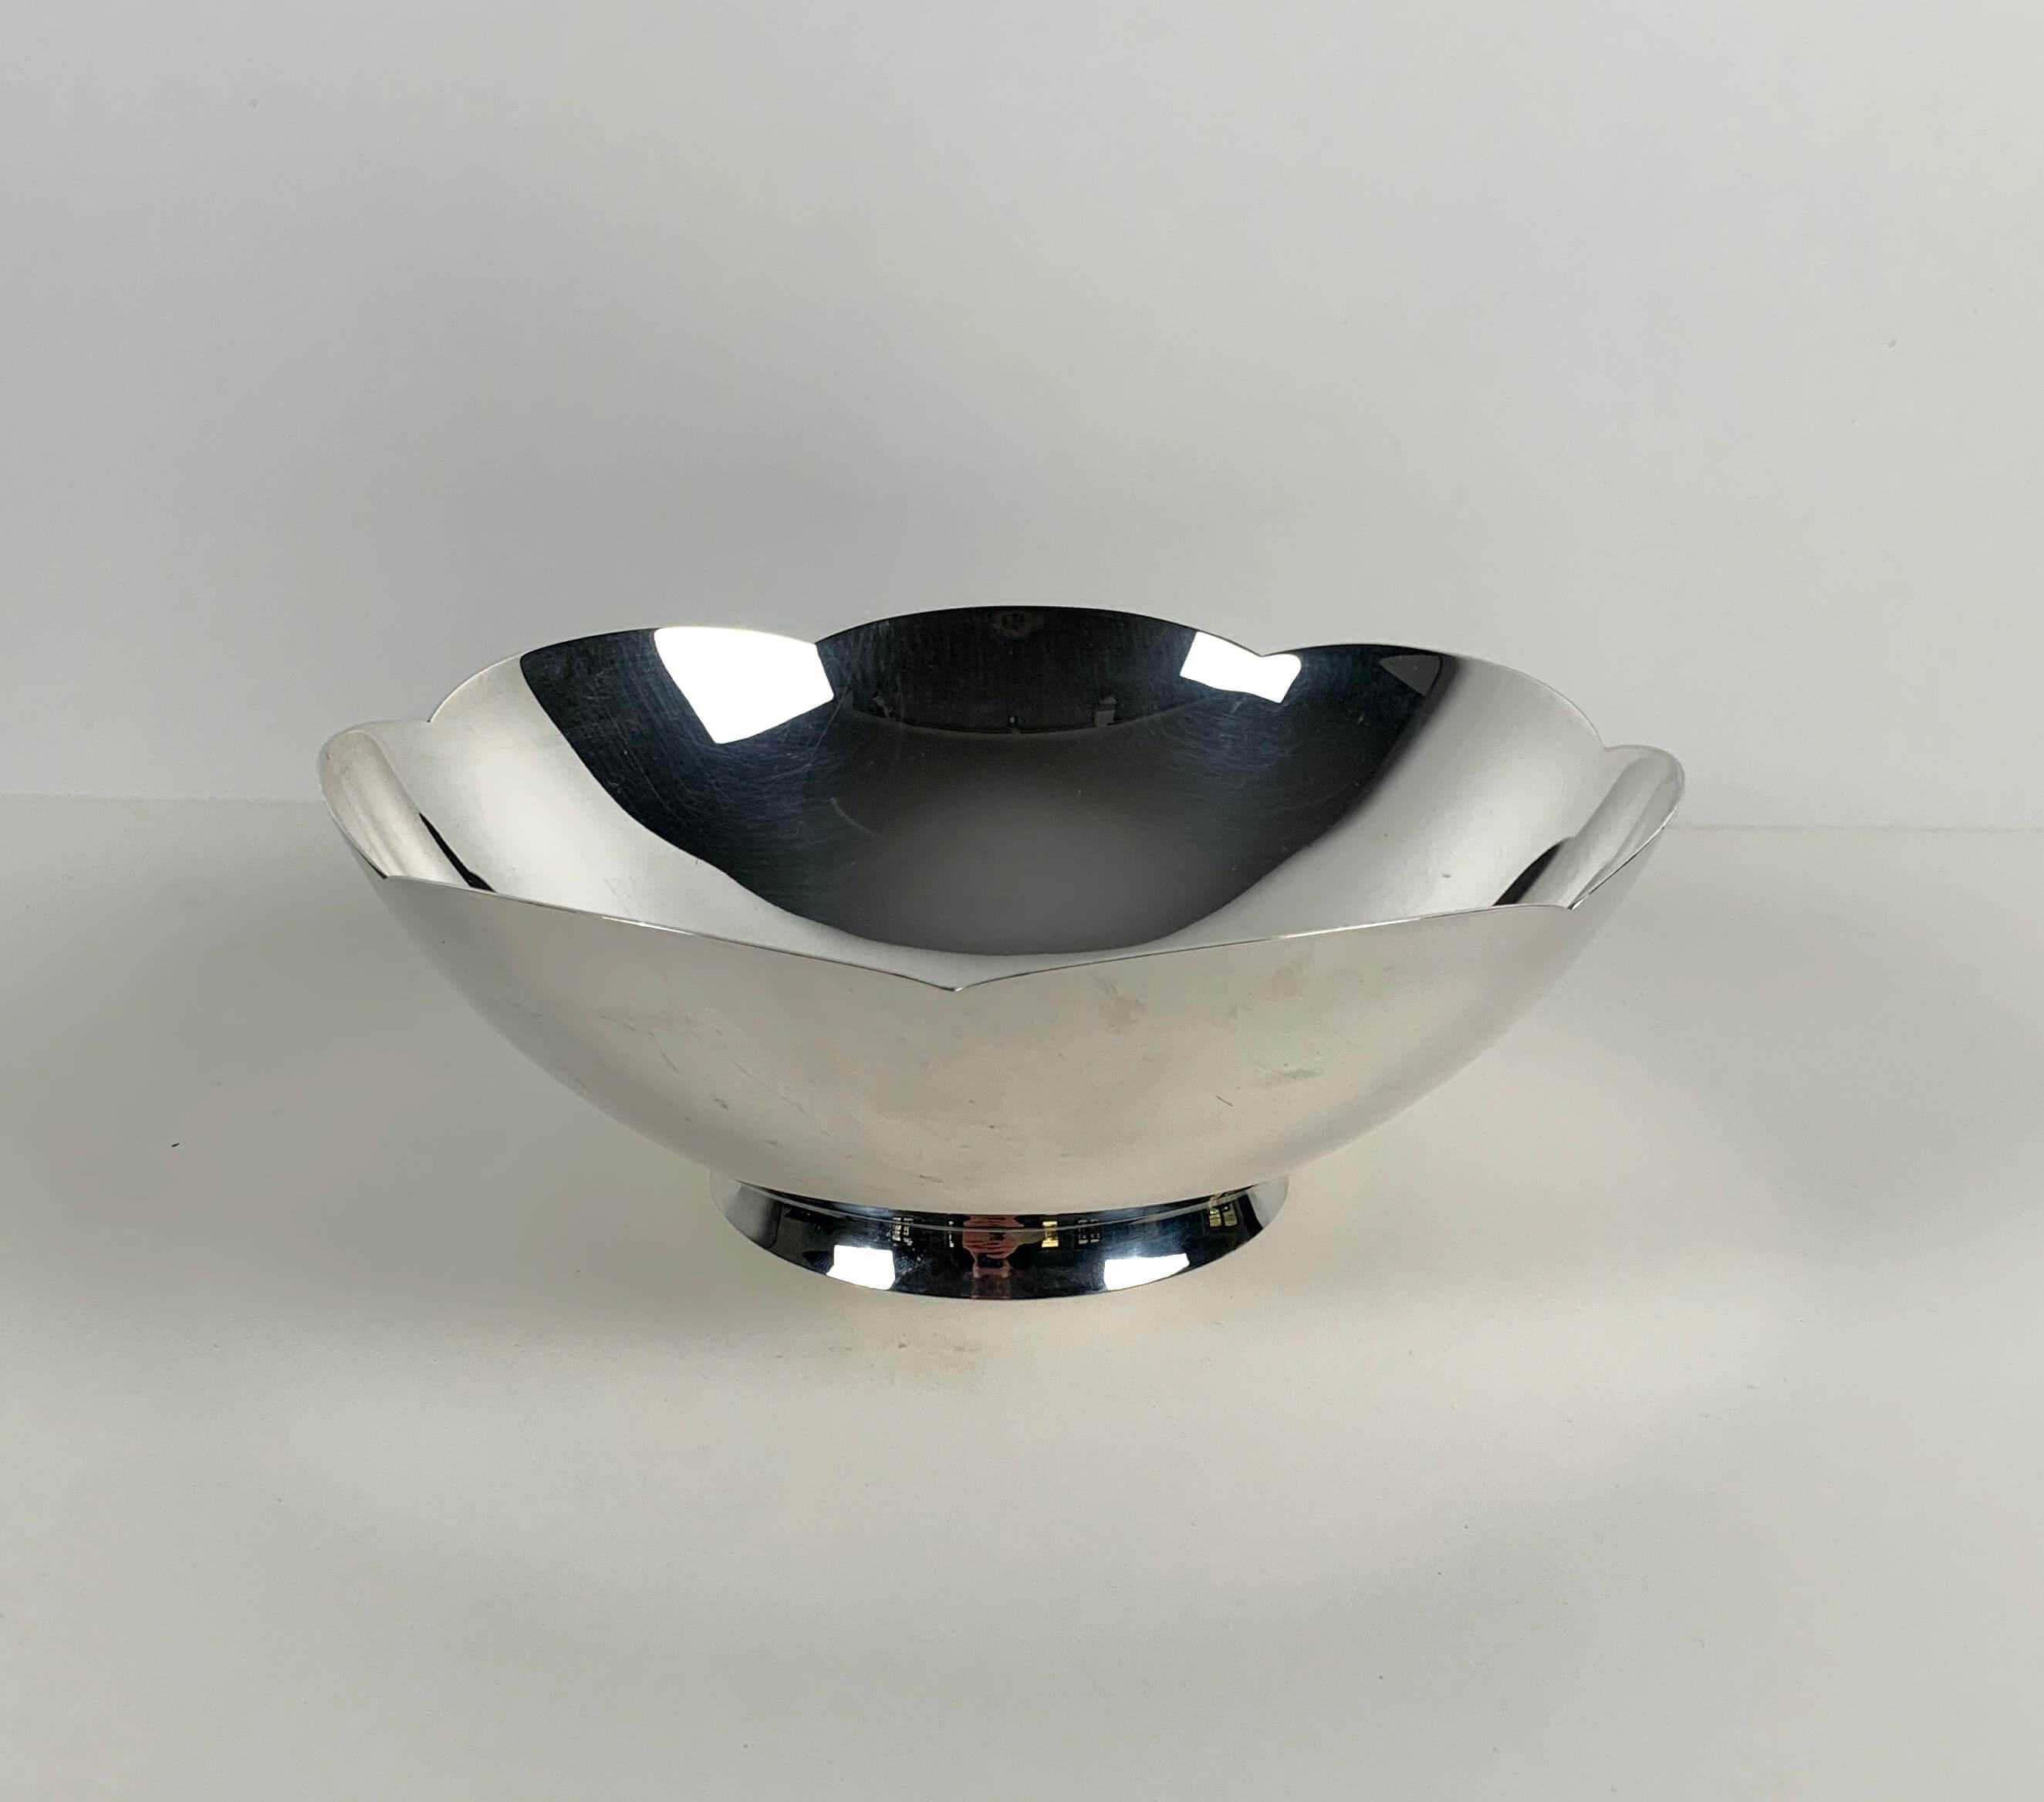 Beautiful Art Deco bowl by Tiffany & Co., New York, Circa 1920-40s.
Great, thick quality. 
Stamped 925 Sterling Silver. Hallmark includes pattern no. 23843.
Dimensions: H 8 cm, Ø 22.5 cm.